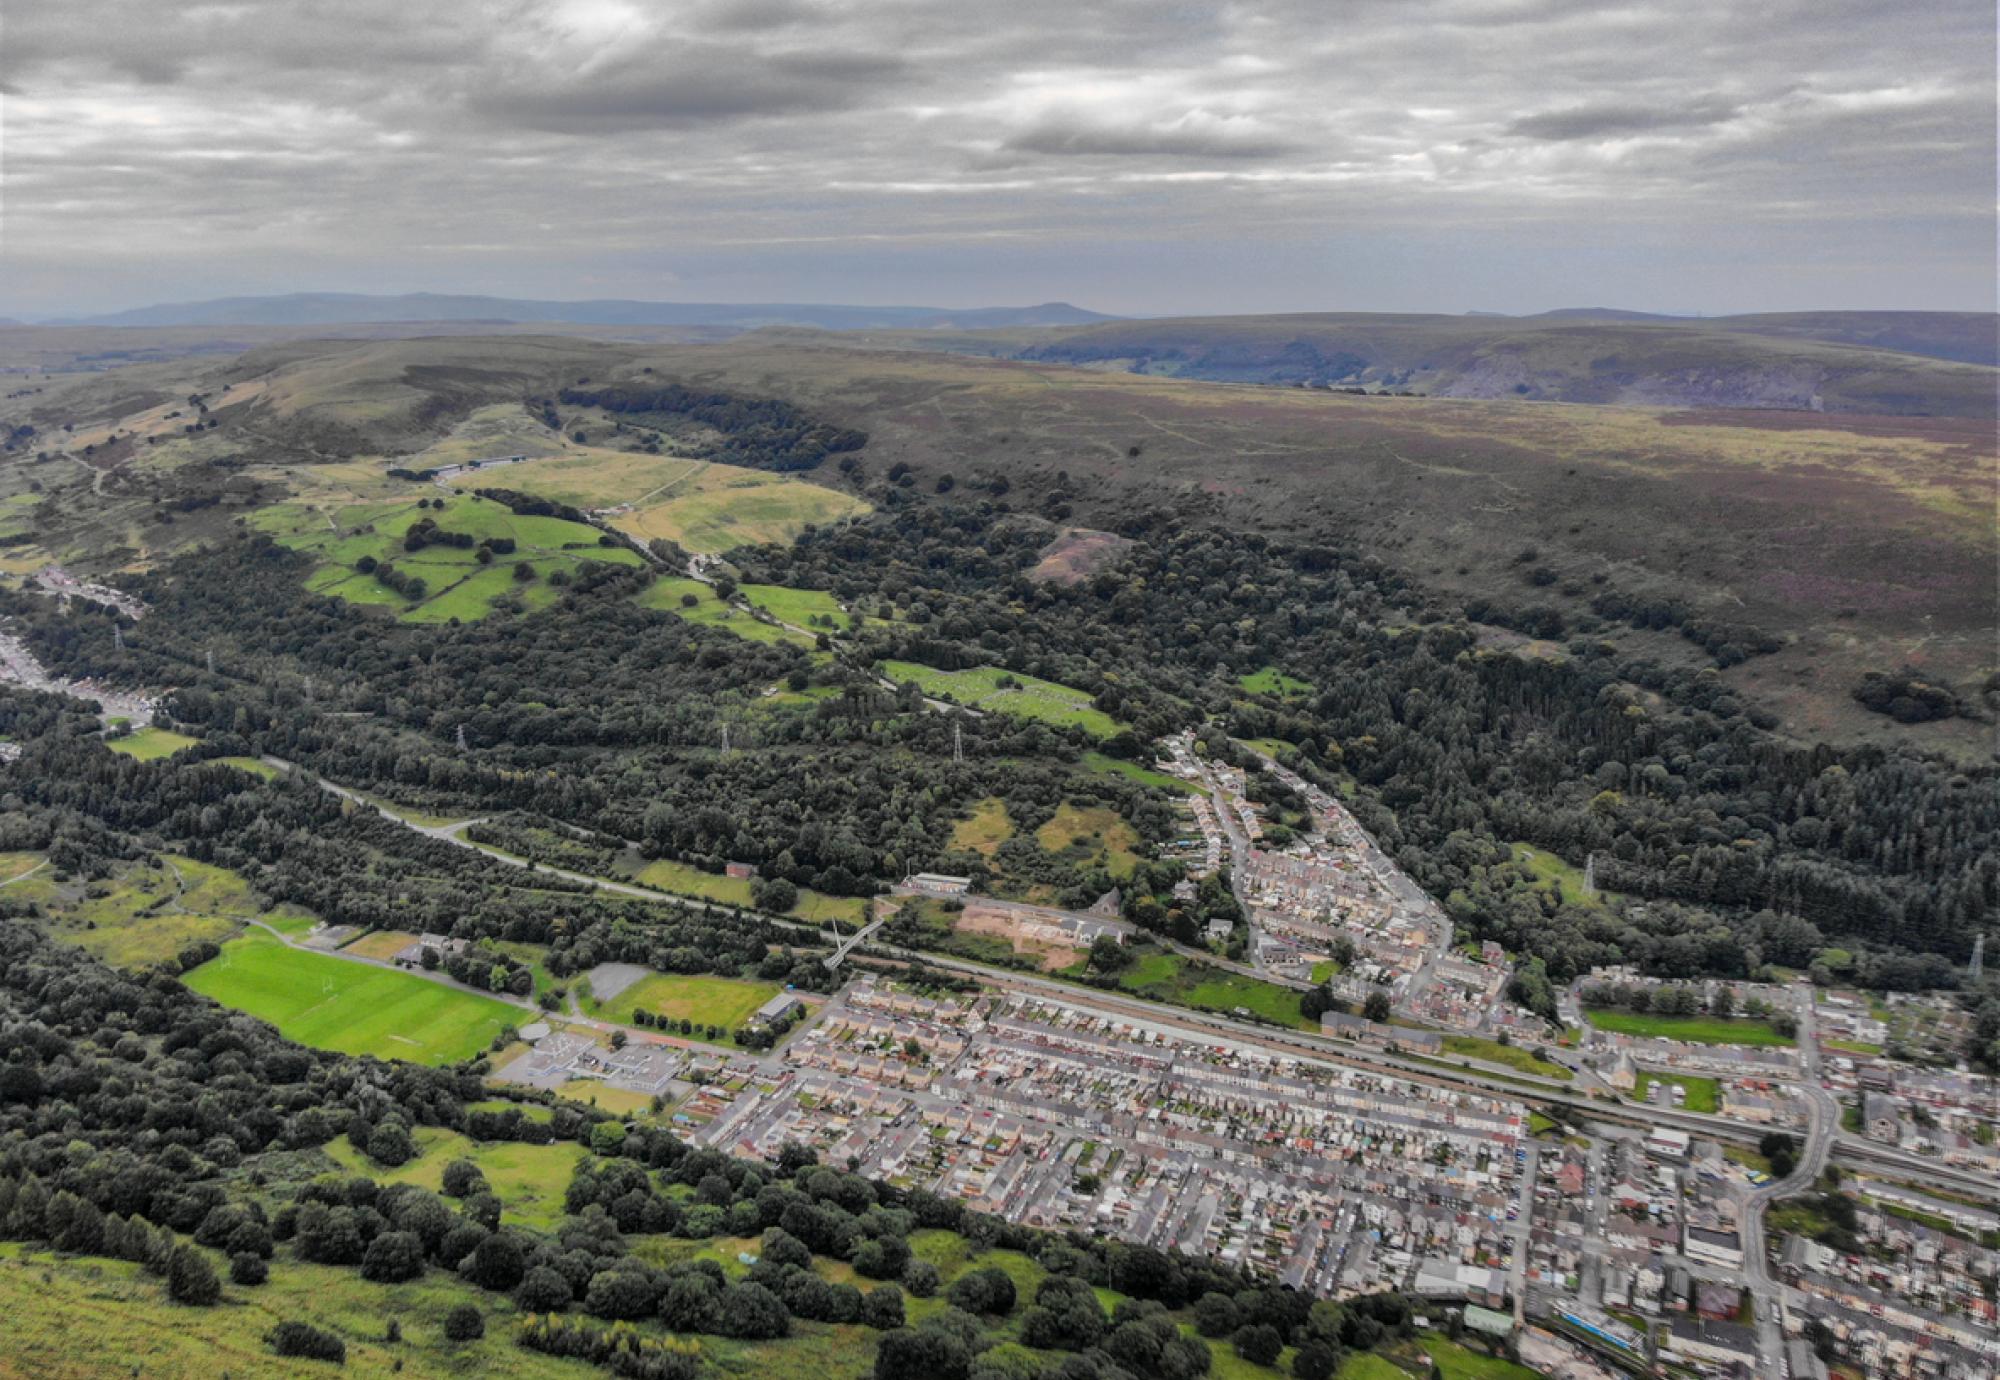 Overhead view of Ebbw Vale